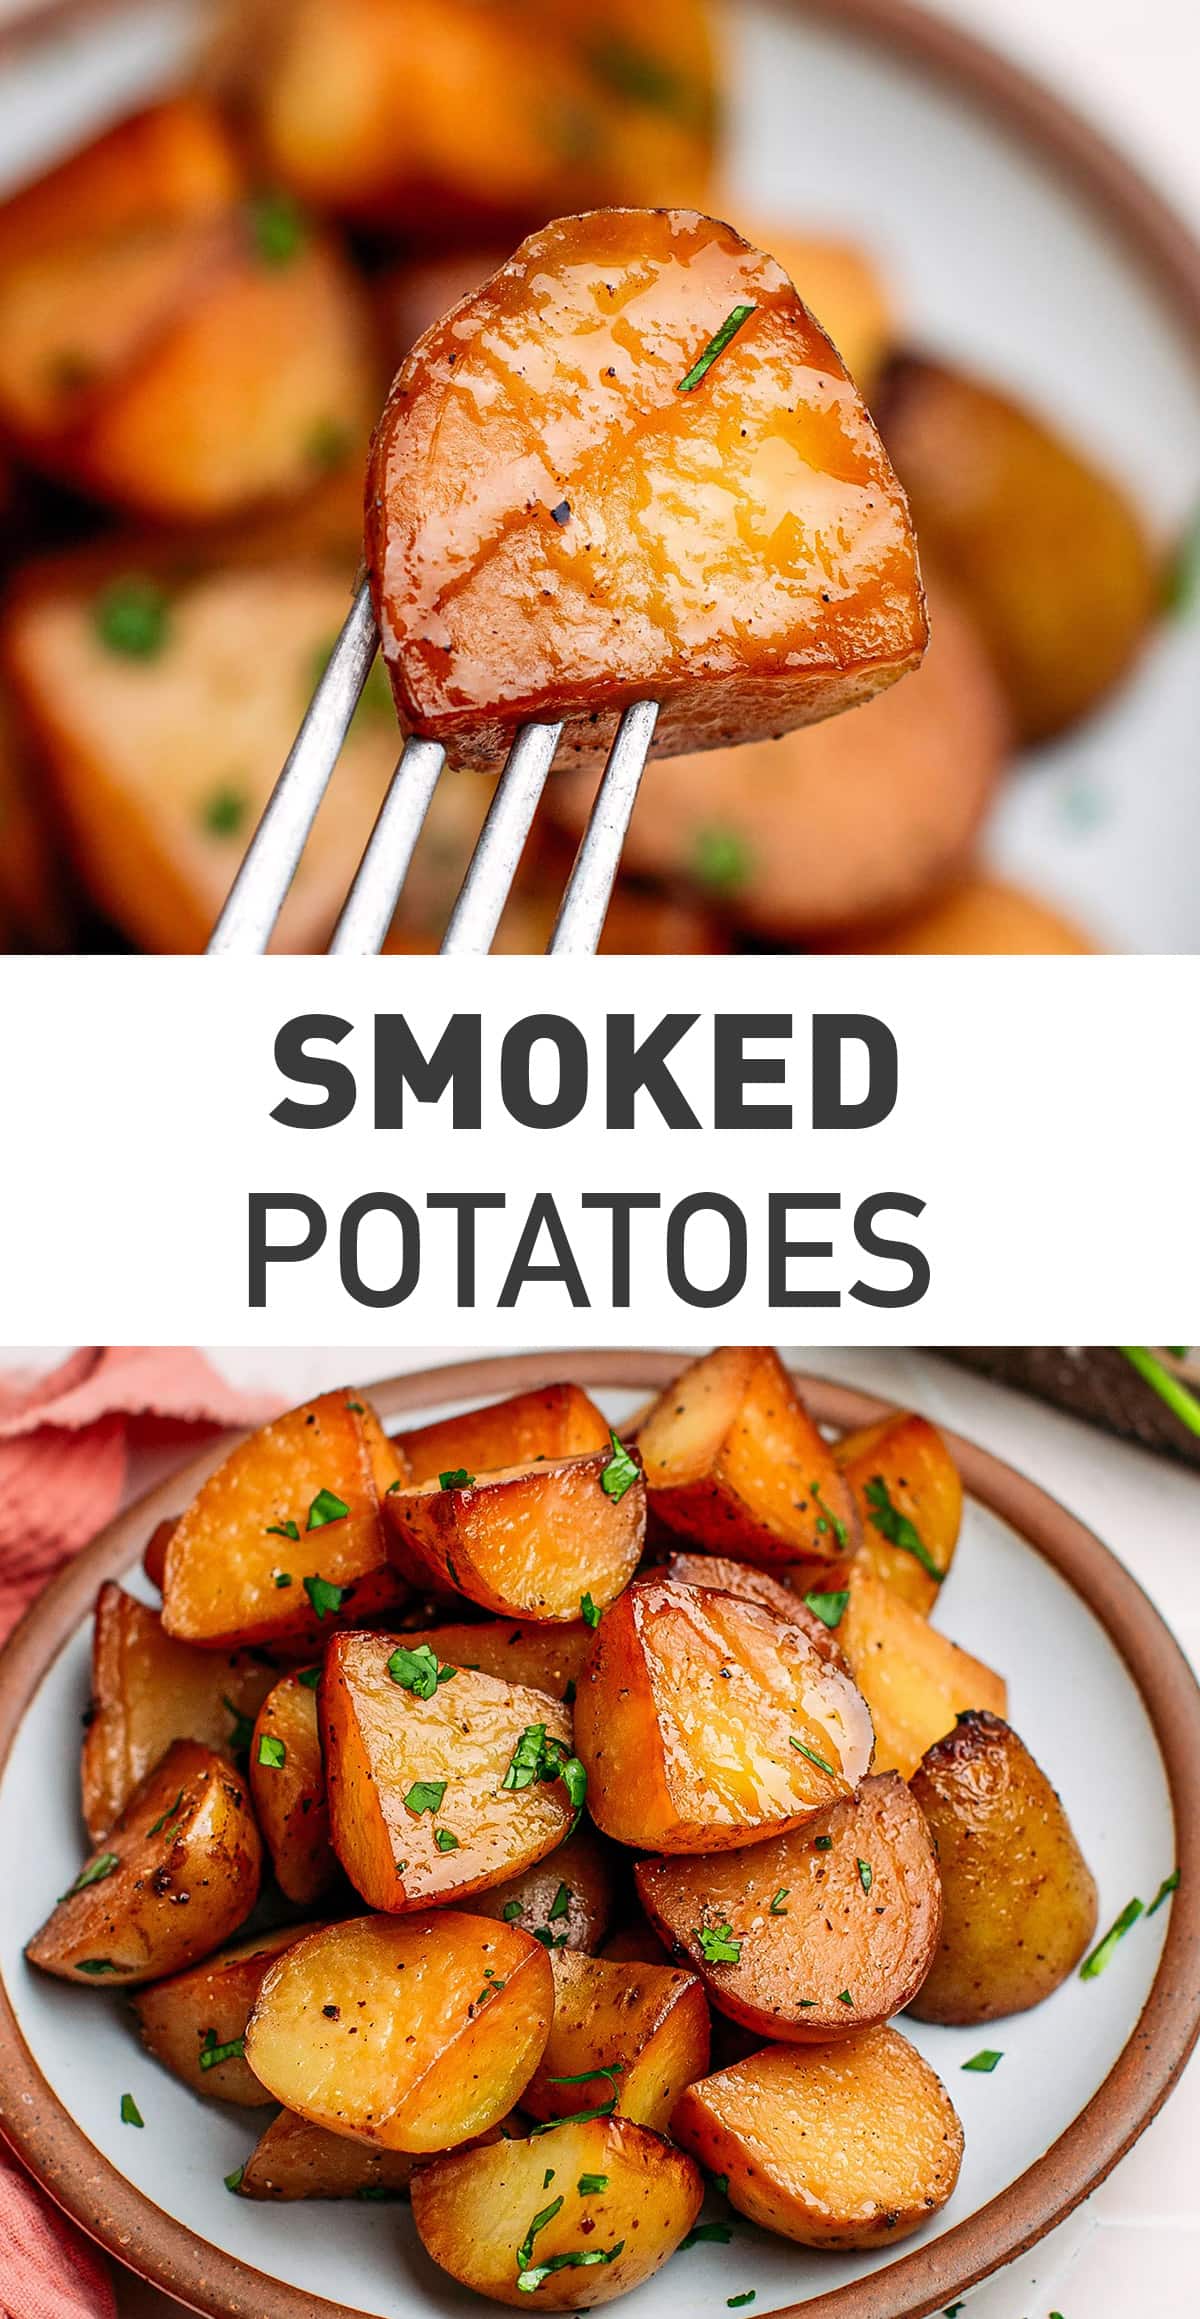 Looking for a new way to enjoy potatoes? We have got you covered with these smoked potatoes! Boiled and then smoked in a stovetop smoker, these potatoes are tender, buttery, and so comforting! You will love their deep, smoky flavor! #stovetopsmoker